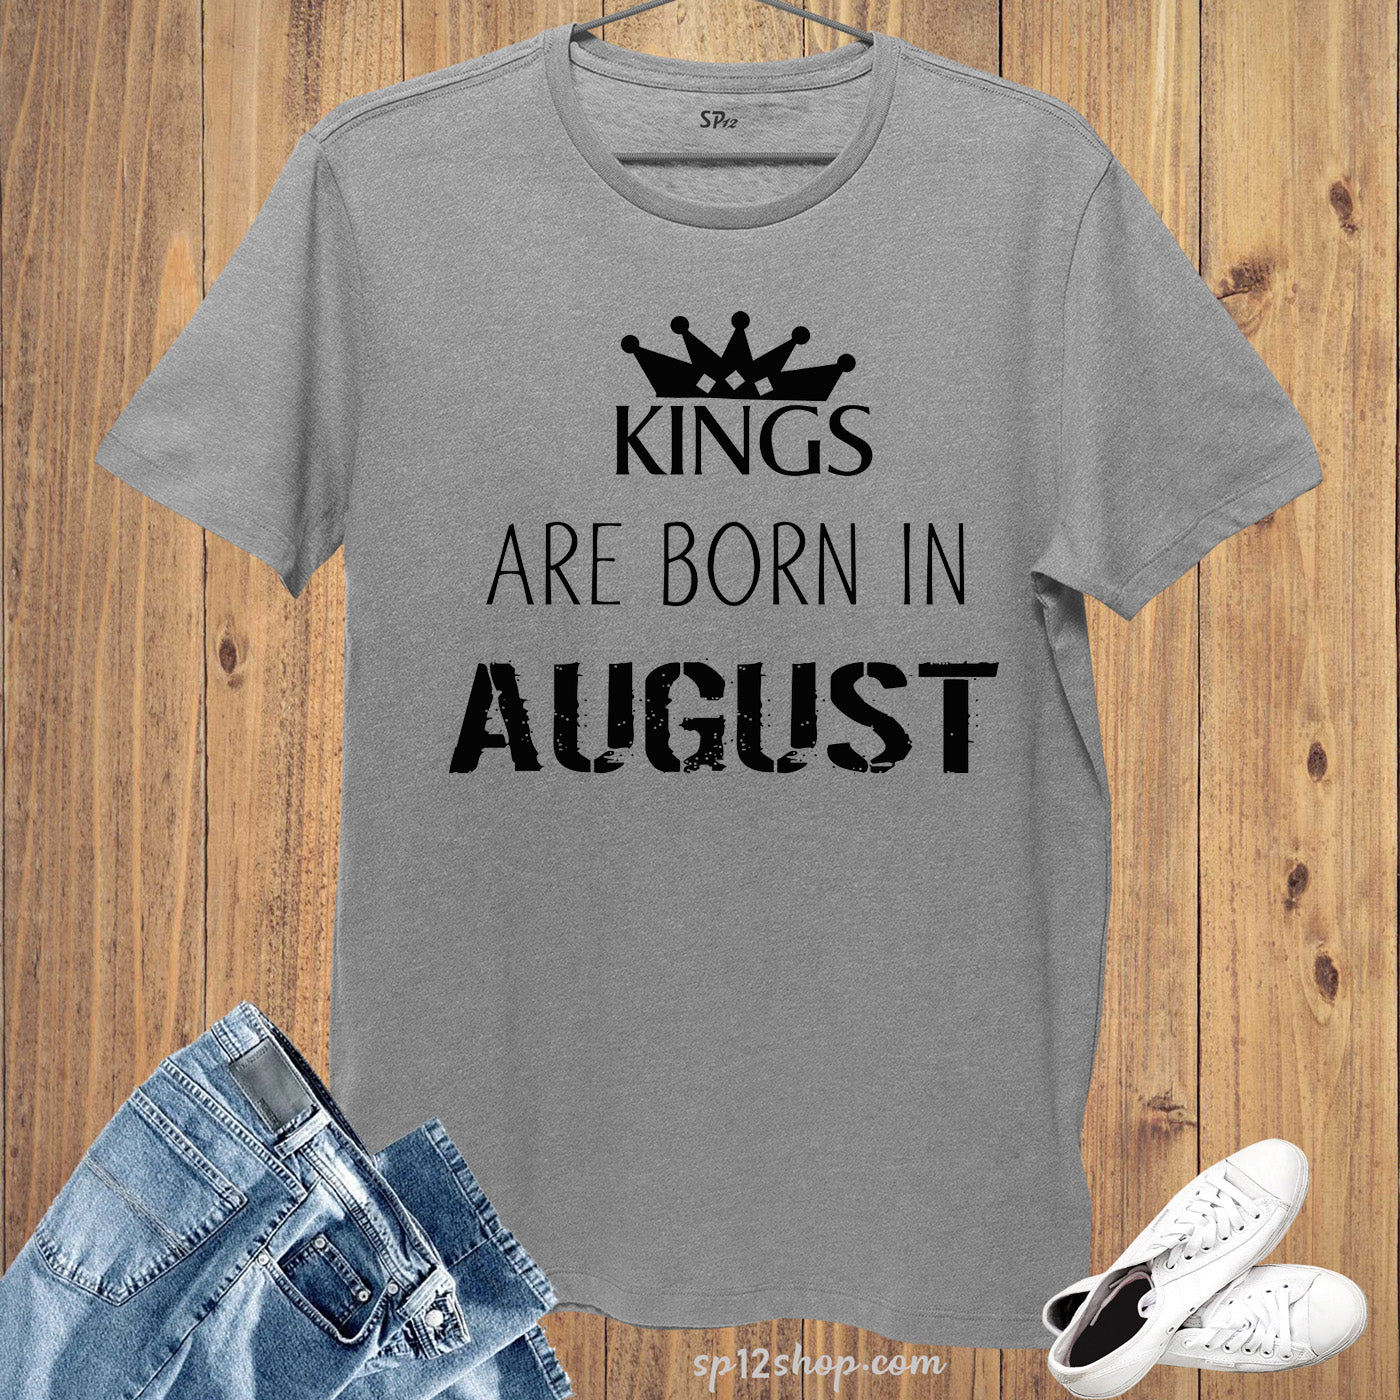 Birthday T Shirt Kings are born in August t-shirt Tee